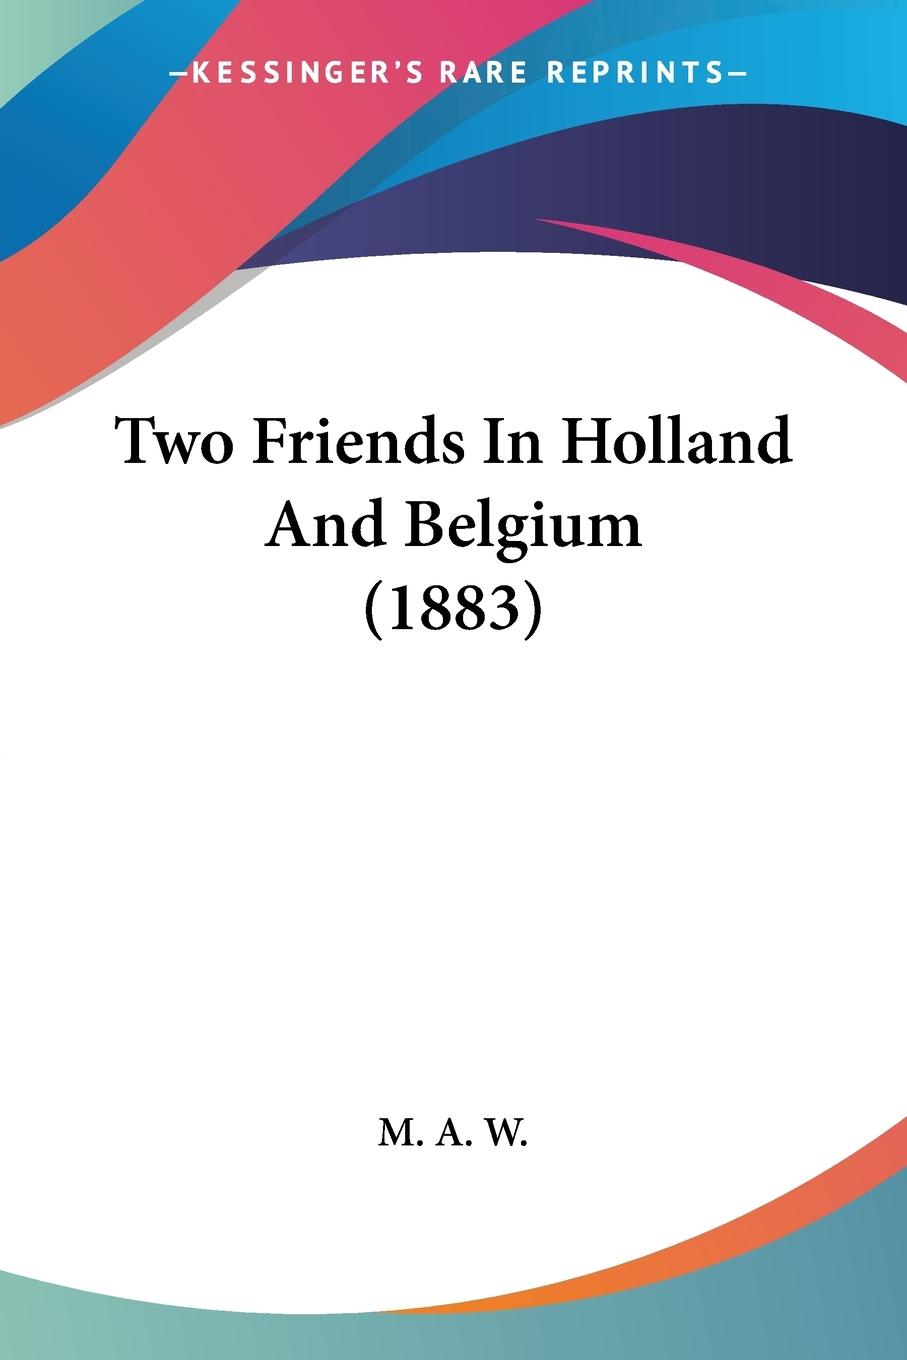 Two Friends In Holland And Belgium (1883) - M. A. W.